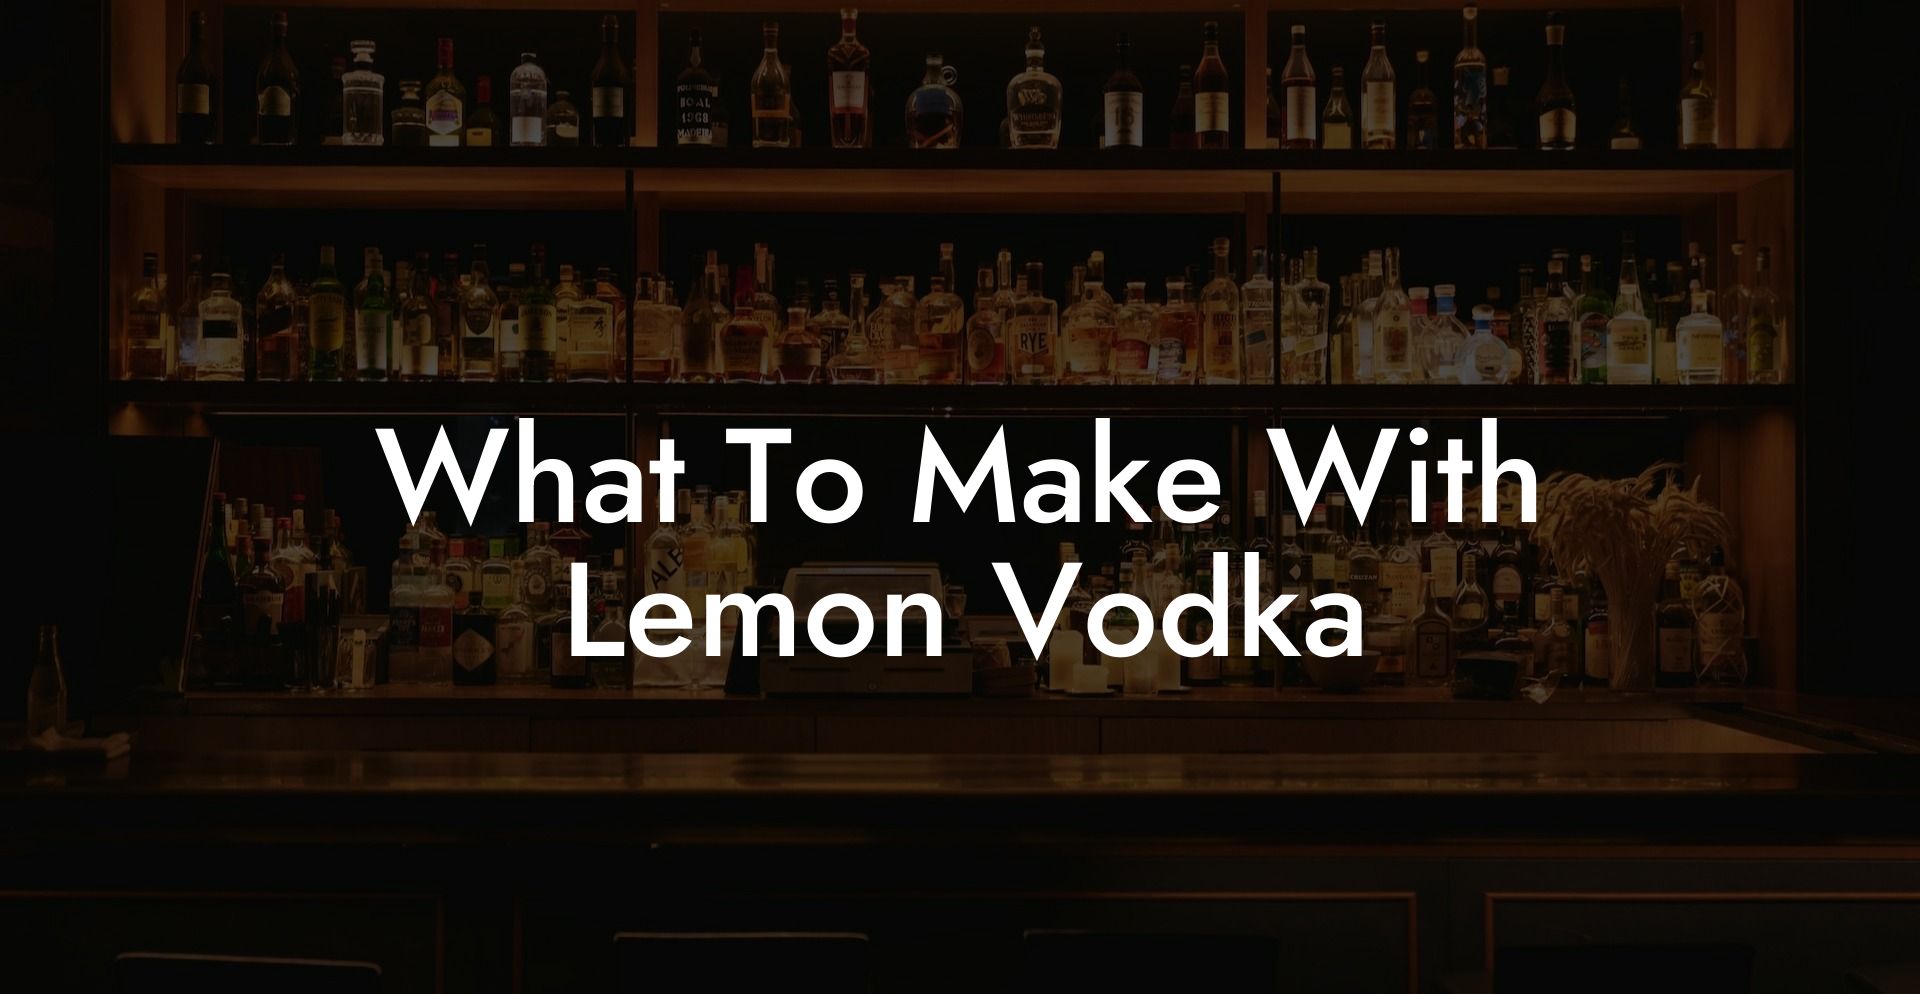 What To Make With Lemon Vodka